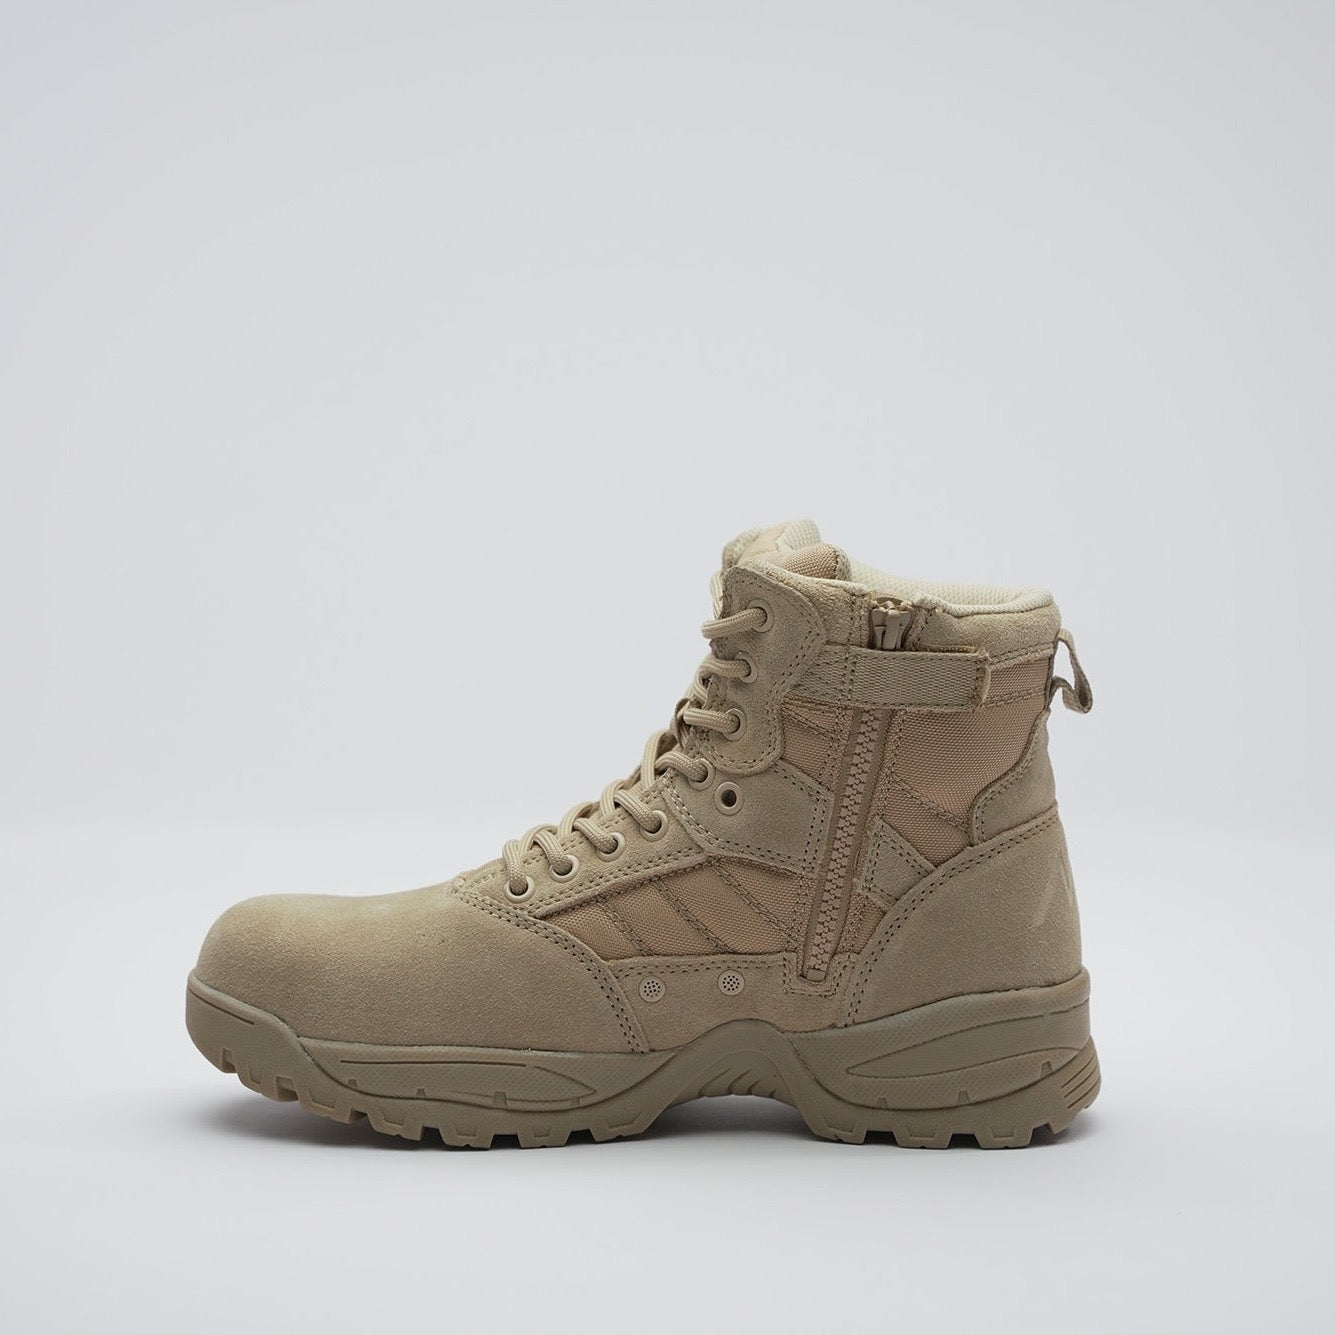 side view of desert tan military boots with side zip and vents